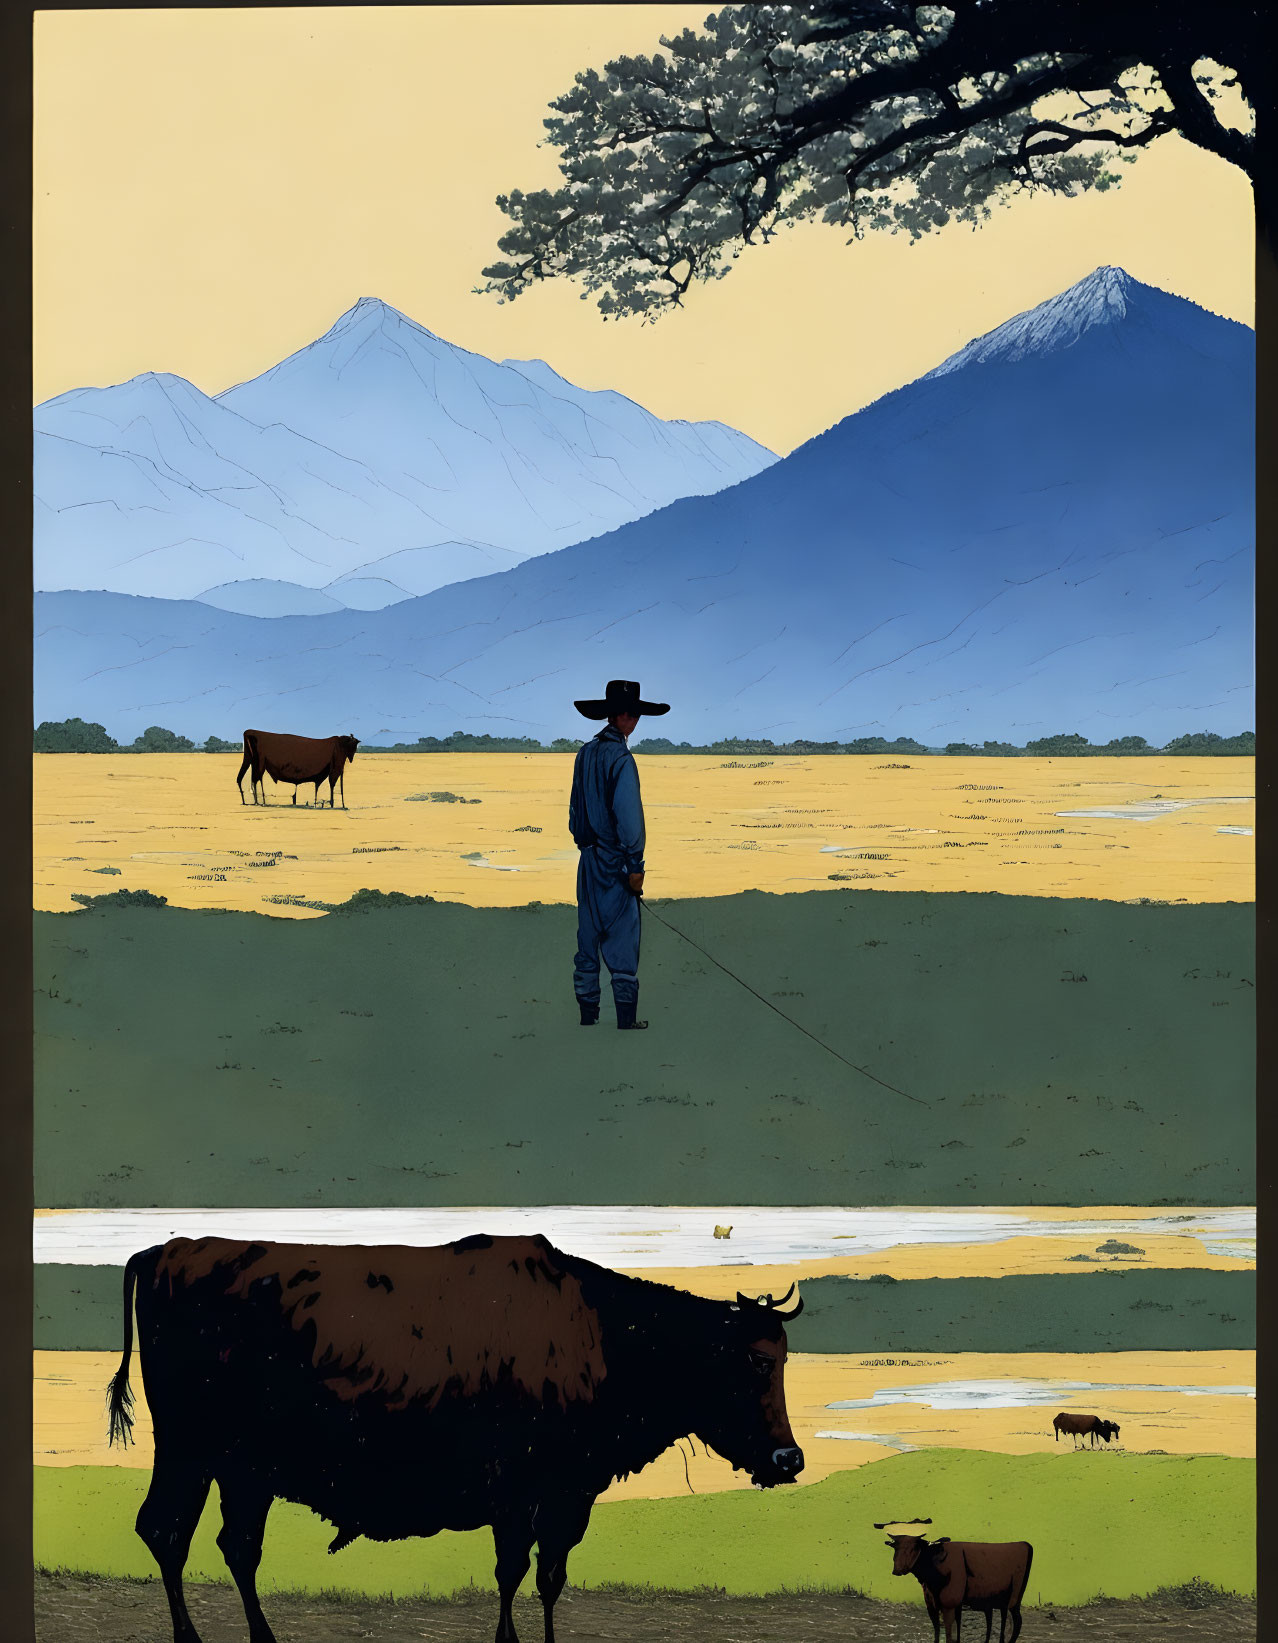 Serene landscape with mountains, person in hat, cattle, lush fields, blue sky